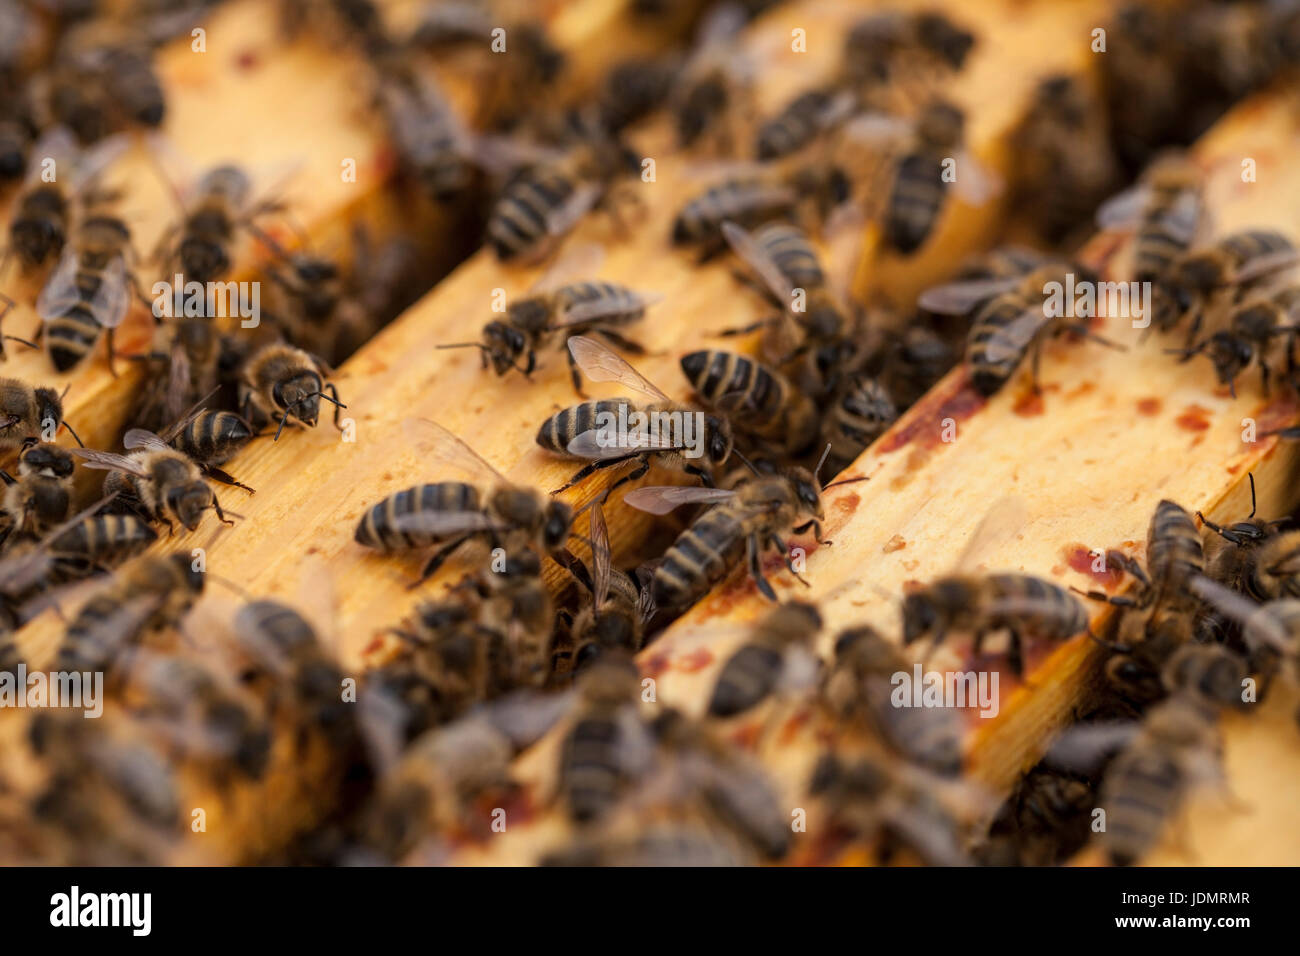 Working bees on a honeycomb Stock Photo